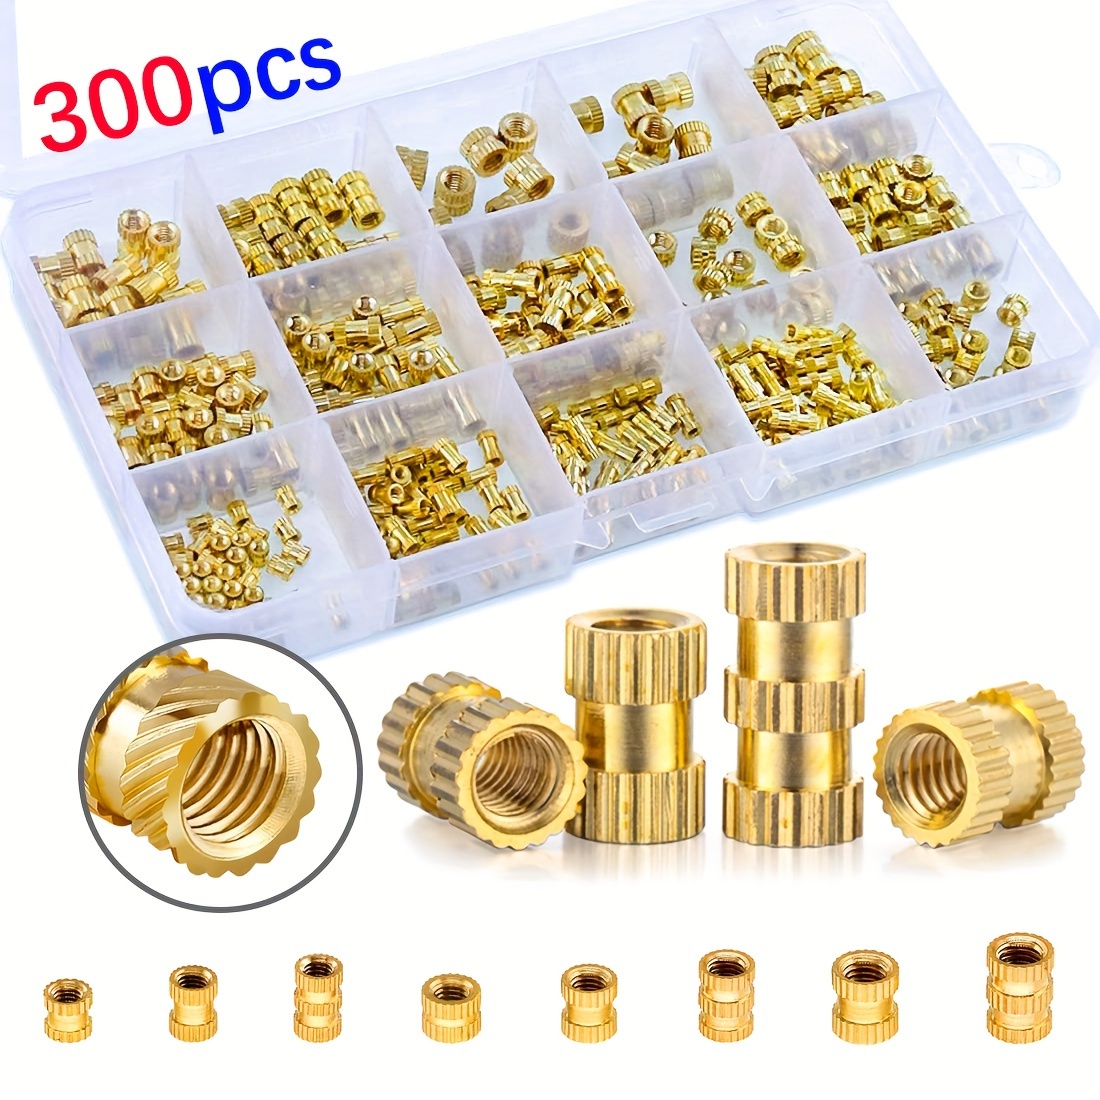 

100/300pcs Thread Inserts M2 M3 M4 M5 M6 Female Male Piping Nut Assortment Kits, Brass Heat Setting Inserts For Plastic And 3d Printing Assembly